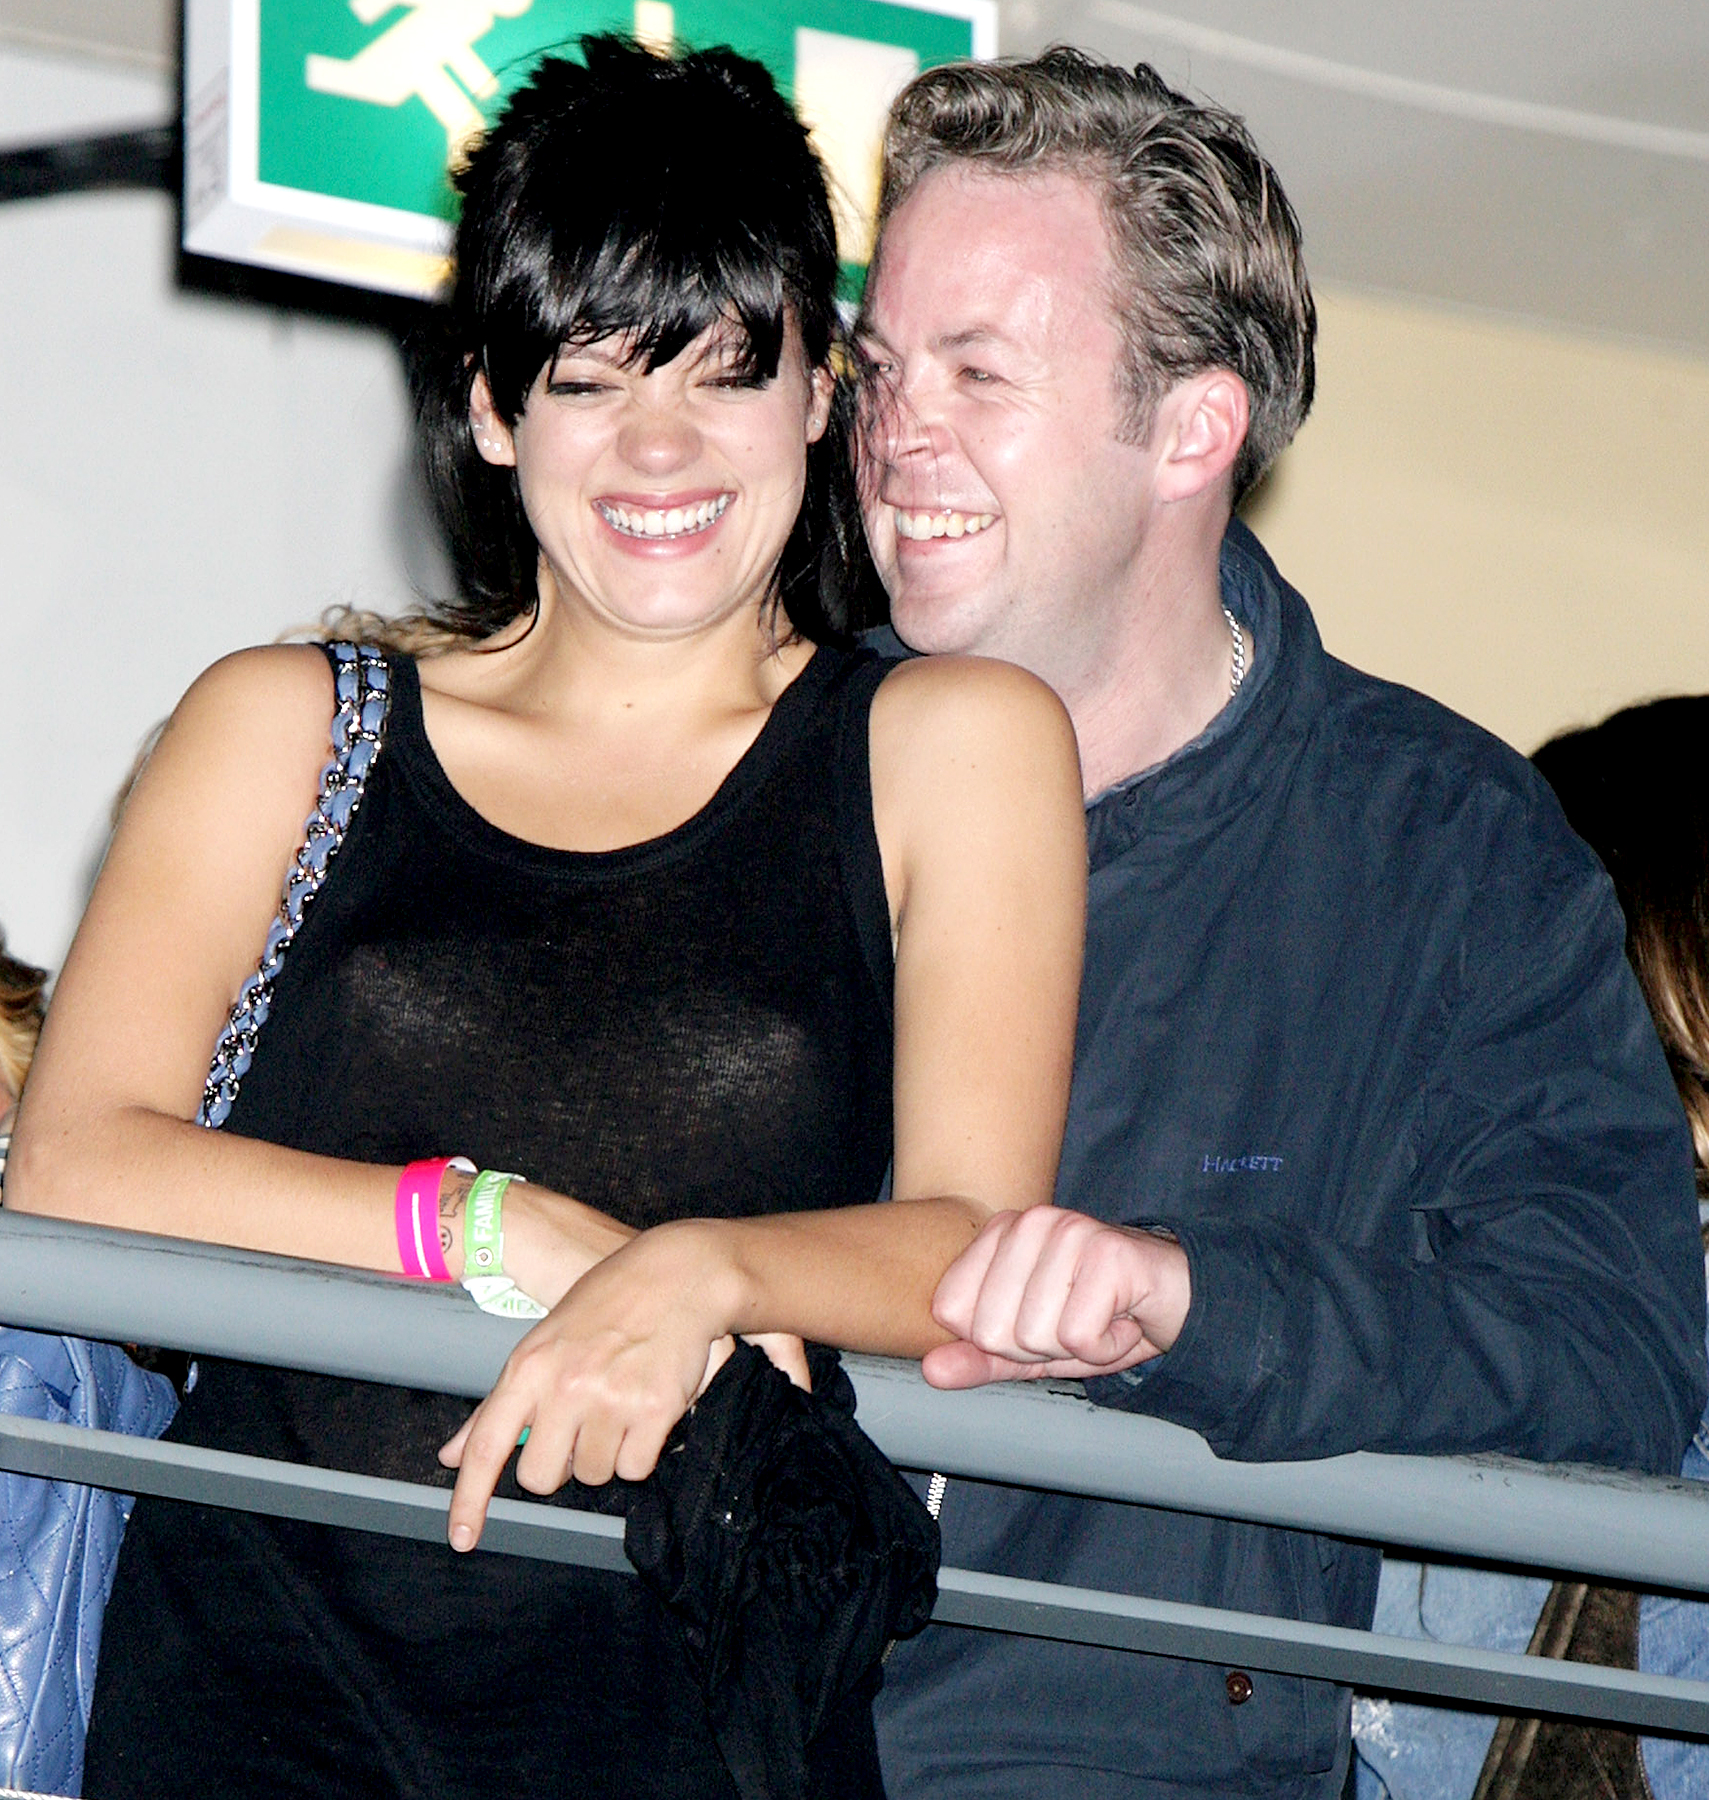 Lily Allen I Slept With Female Escorts While Married to Sam Cooper